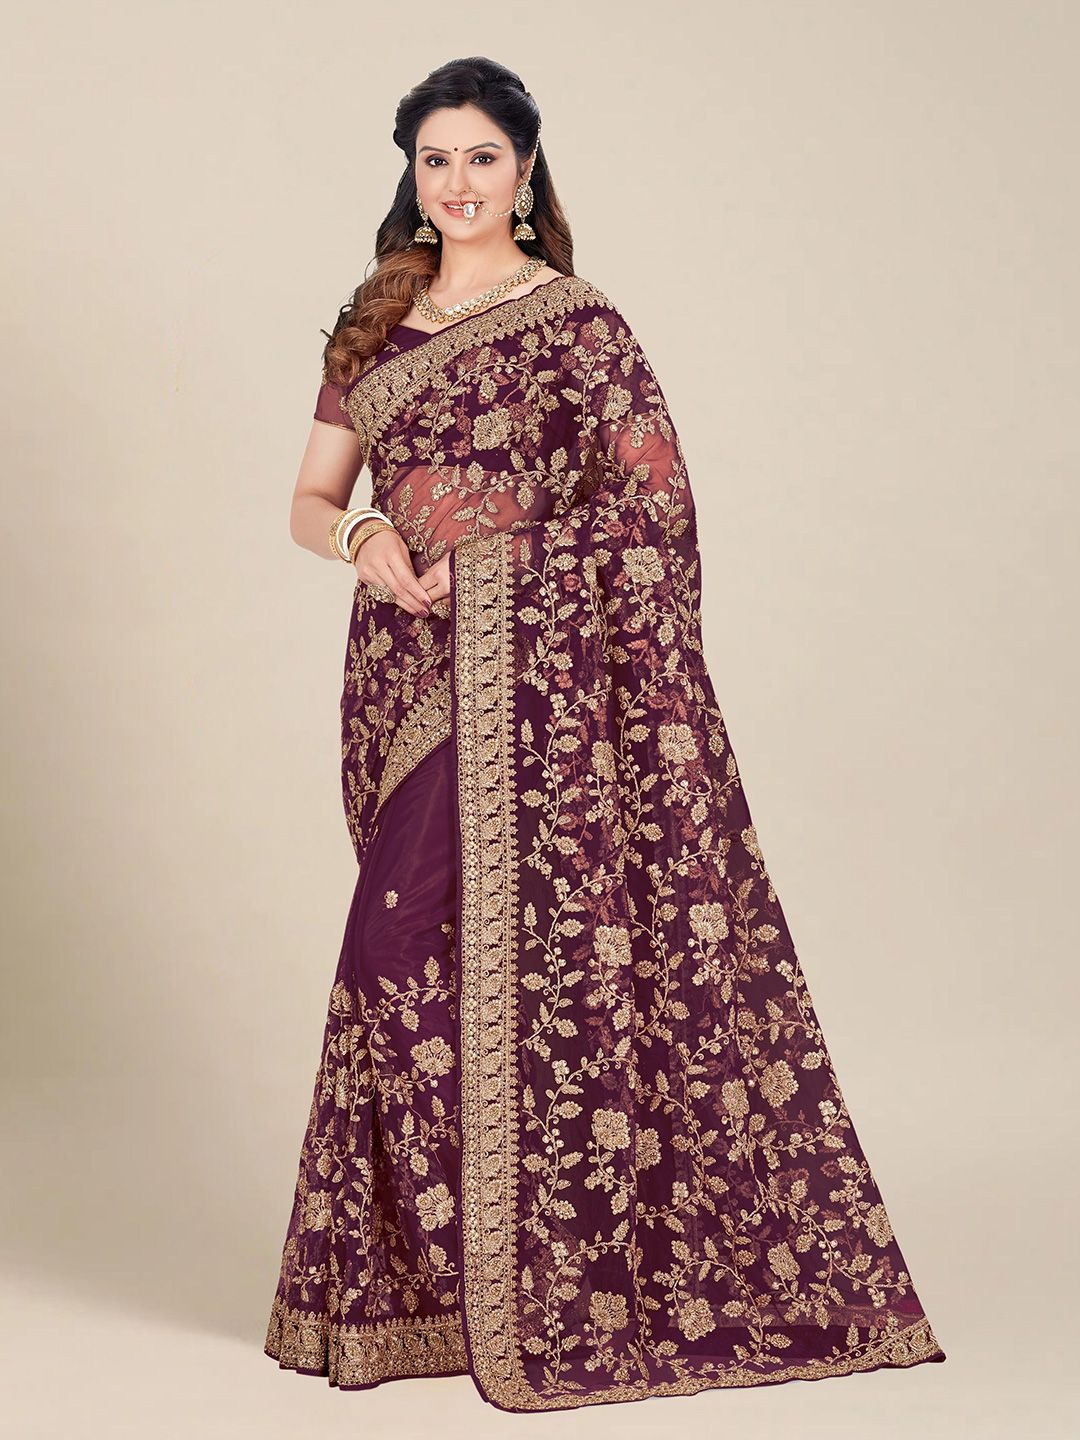 MS RETAIL Mauve & Gold-Toned Floral Embroidered Net Heavy Work Saree Price in India